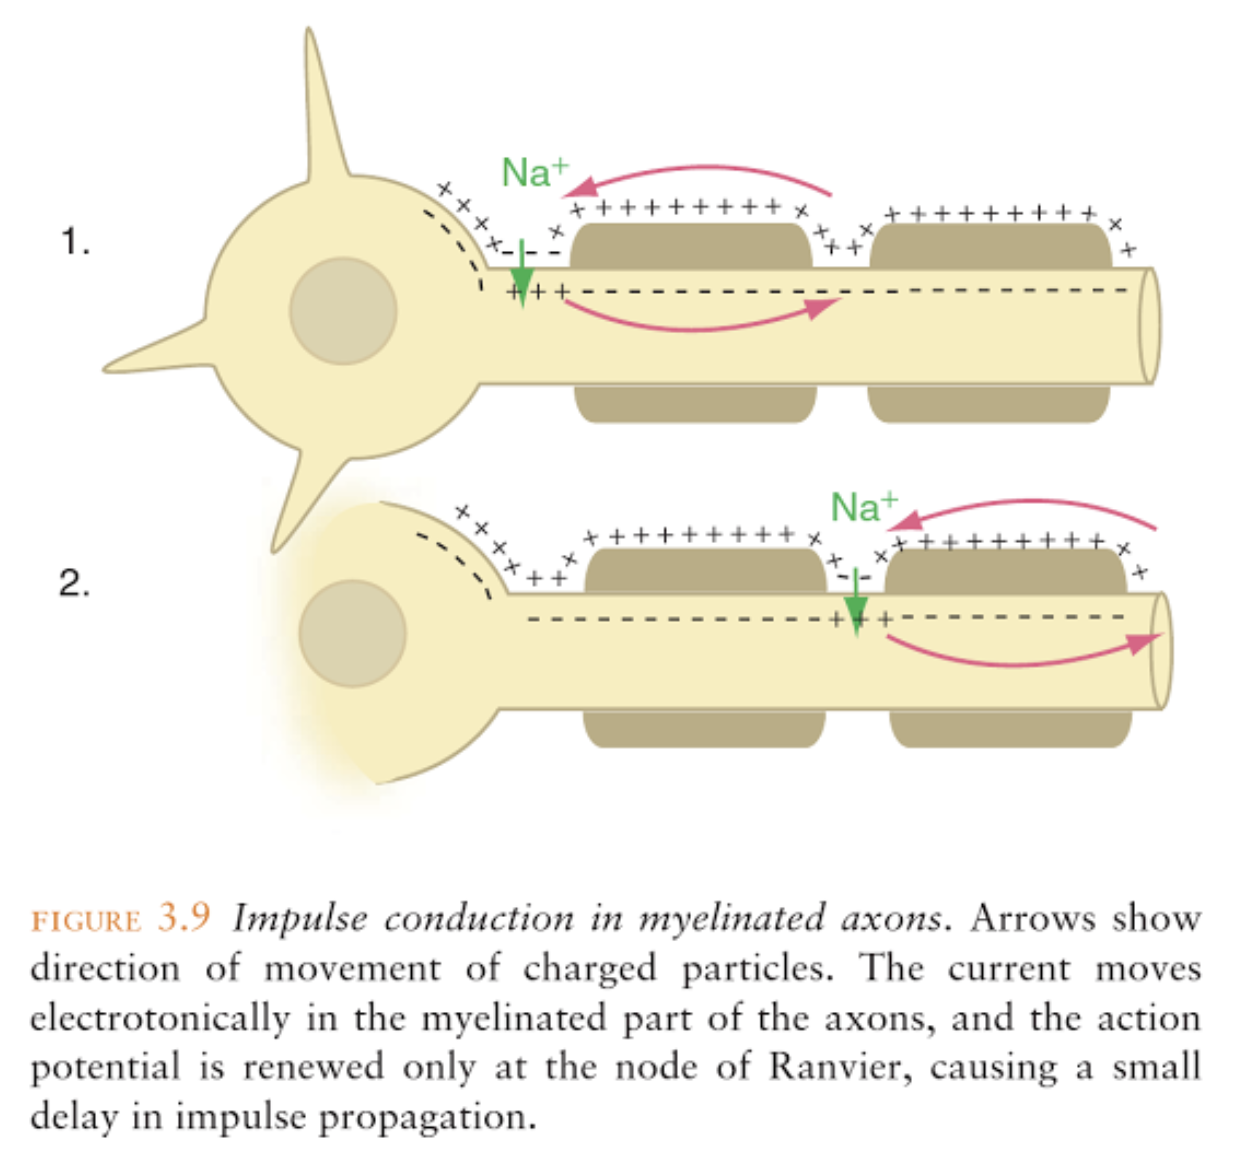 Diagram showing impulse conduction in unmyelinated axons